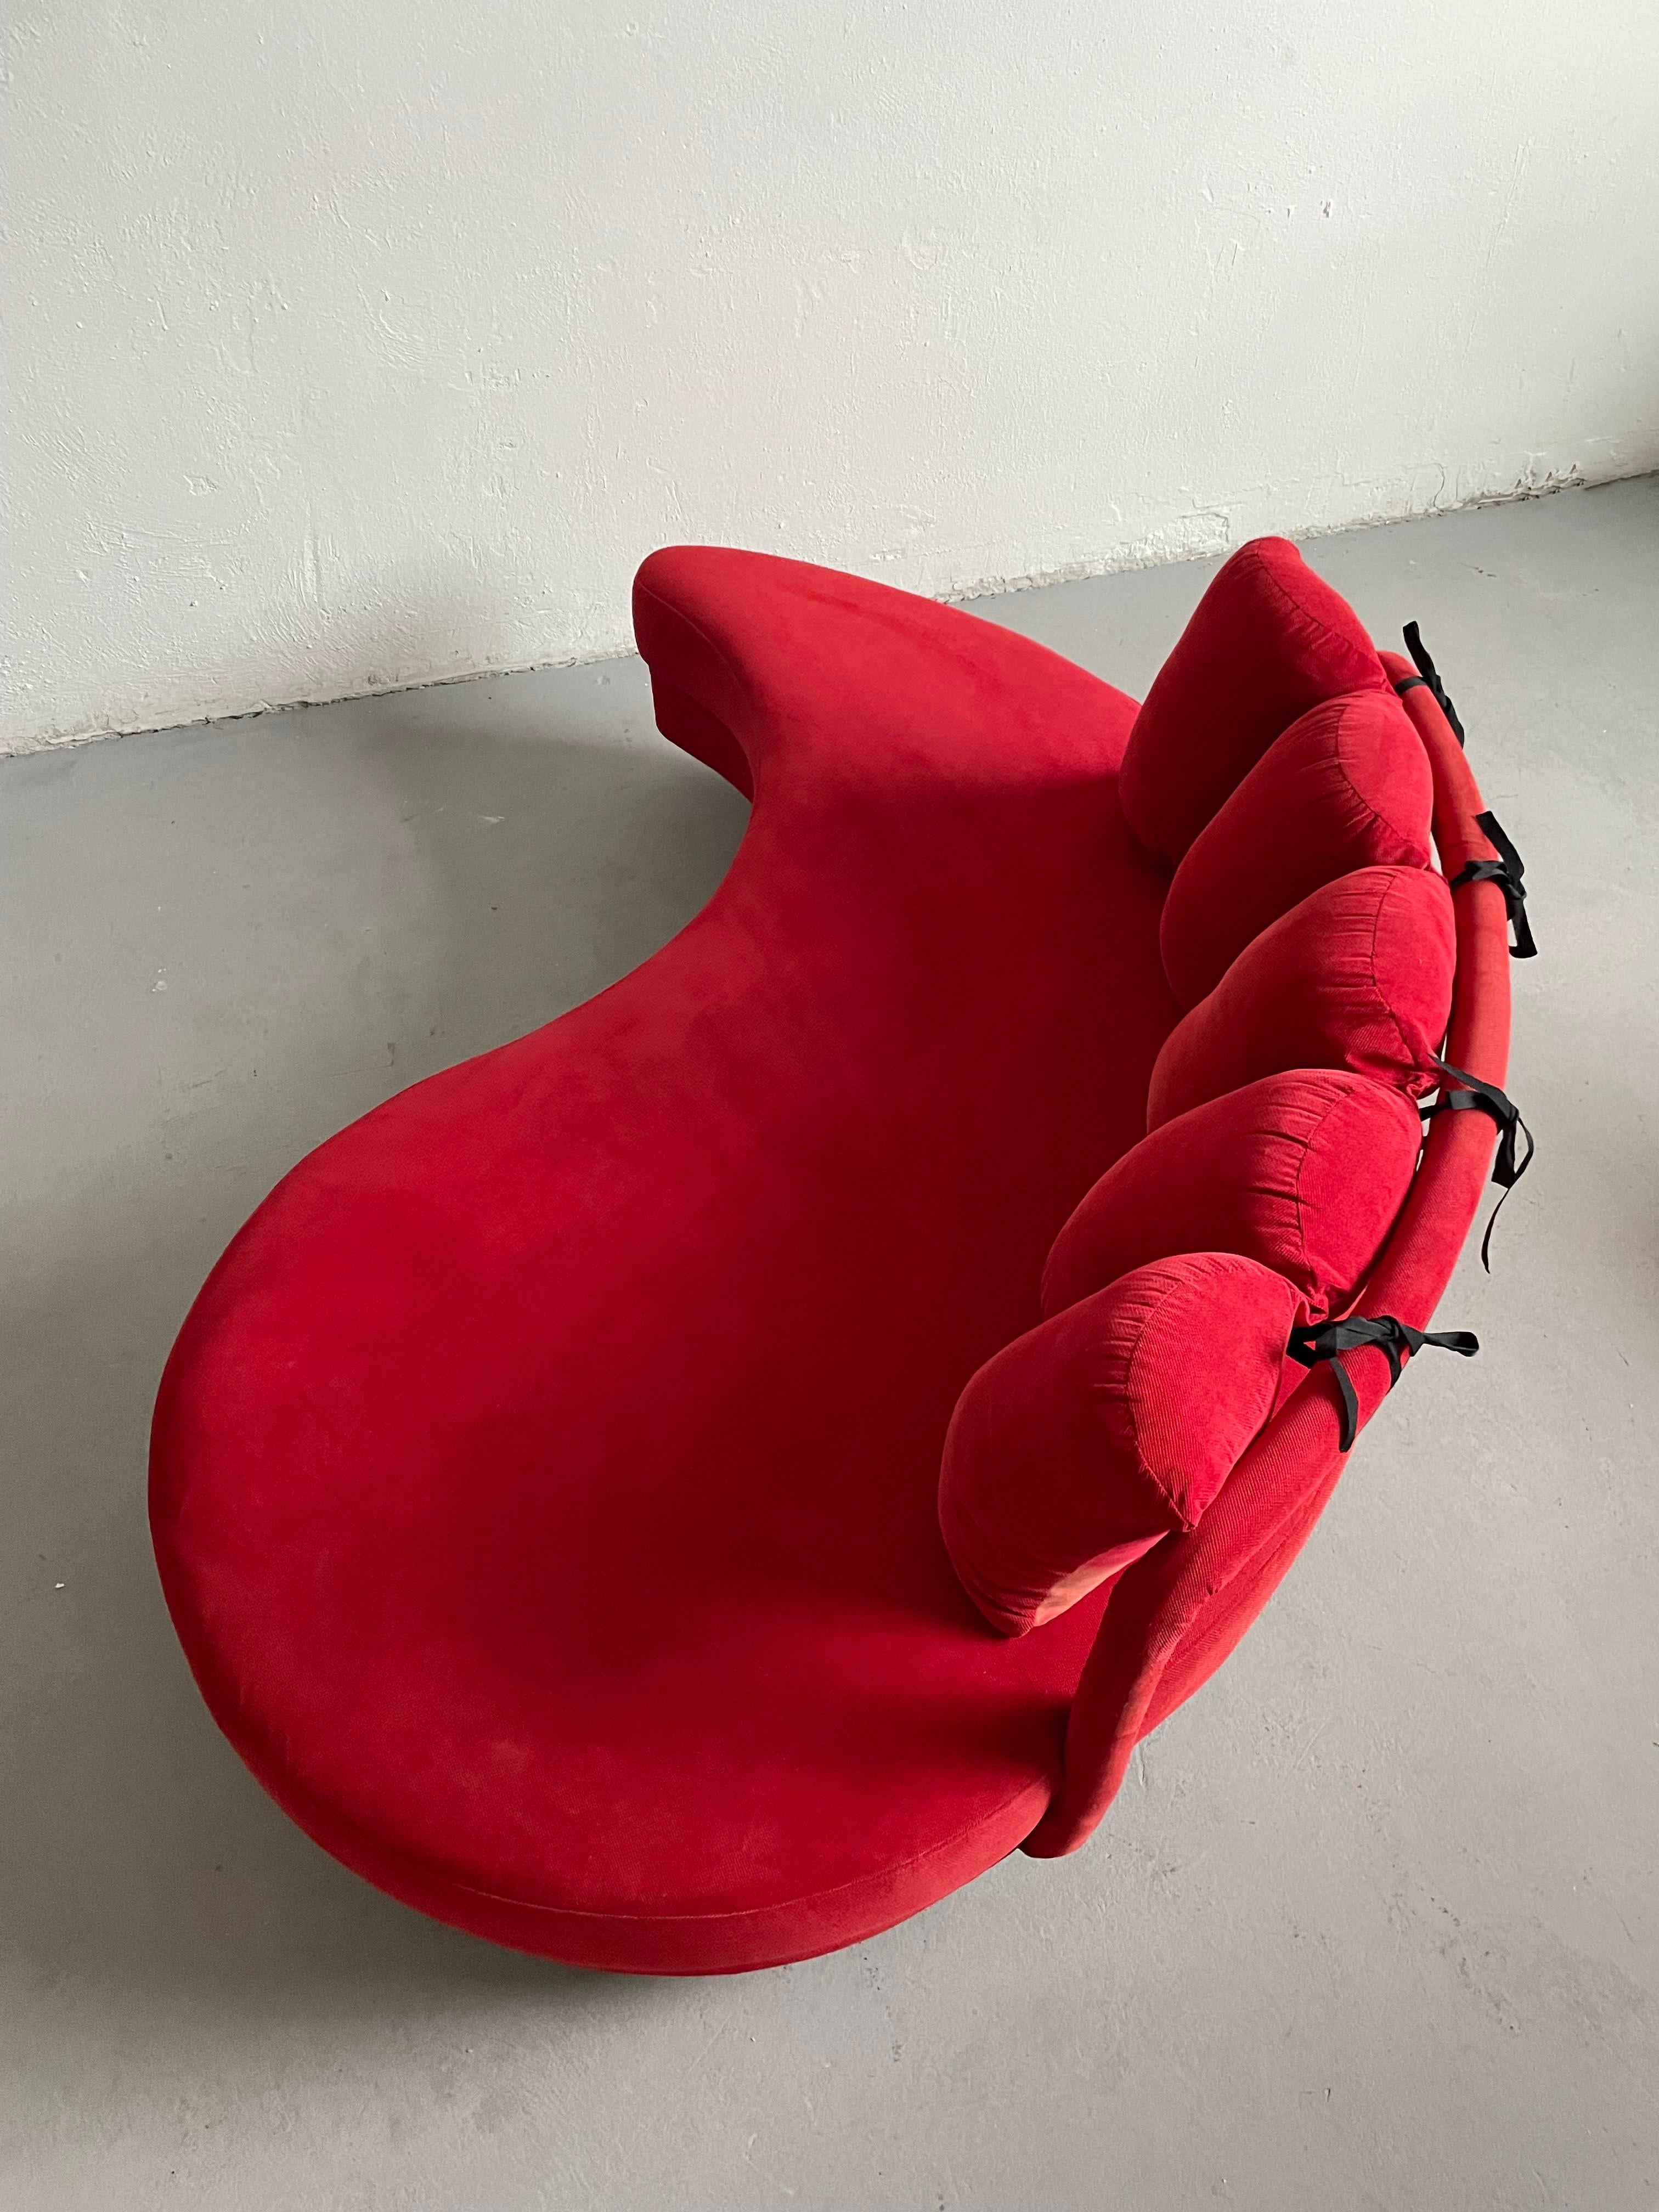 Set of 2 Postmodern Curved Yin-Yang Shaped Sofa Daybeds in Red Fabric, c 1980s For Sale 7